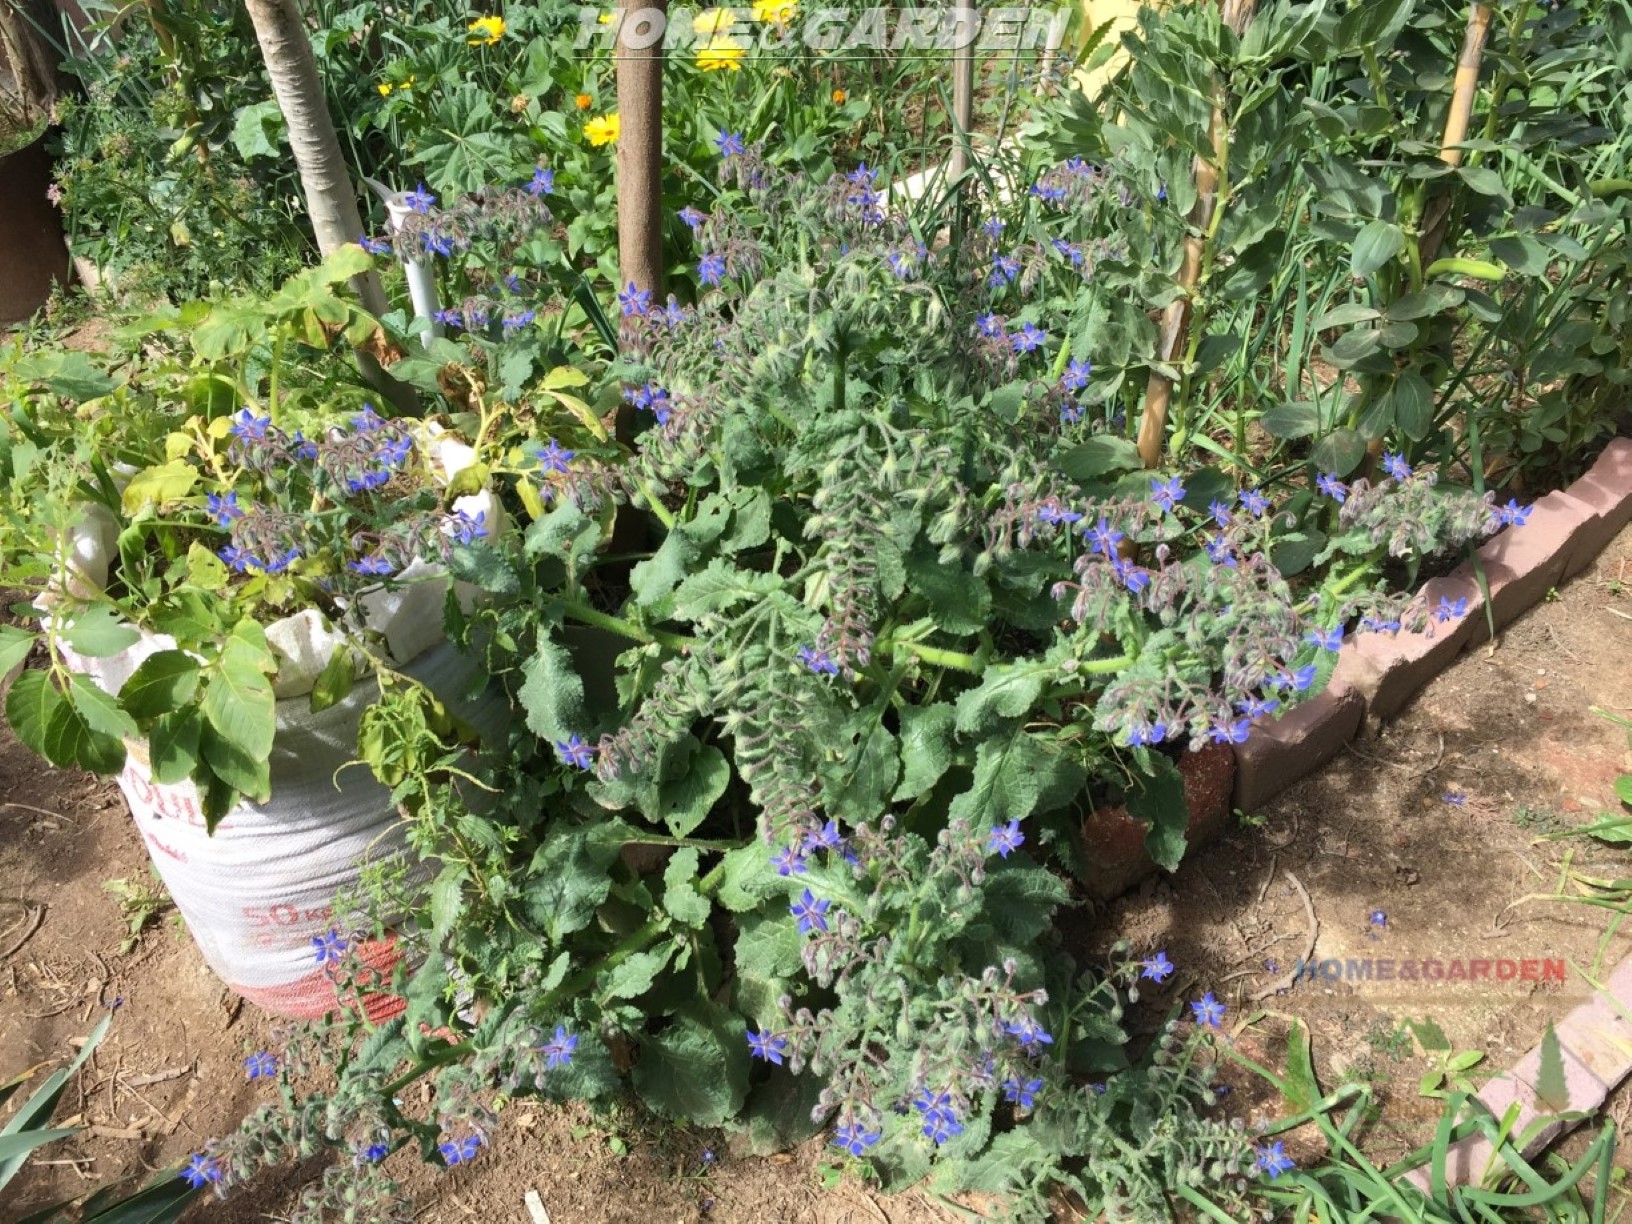 Borage a flowering herb with blue star-shaped blossoms, it's my favorite of pollinators in general. Not only does it improve the growth and flavor of tomatoes as it protects them. Borage acts as a deterrent to tomato hornworms as well.